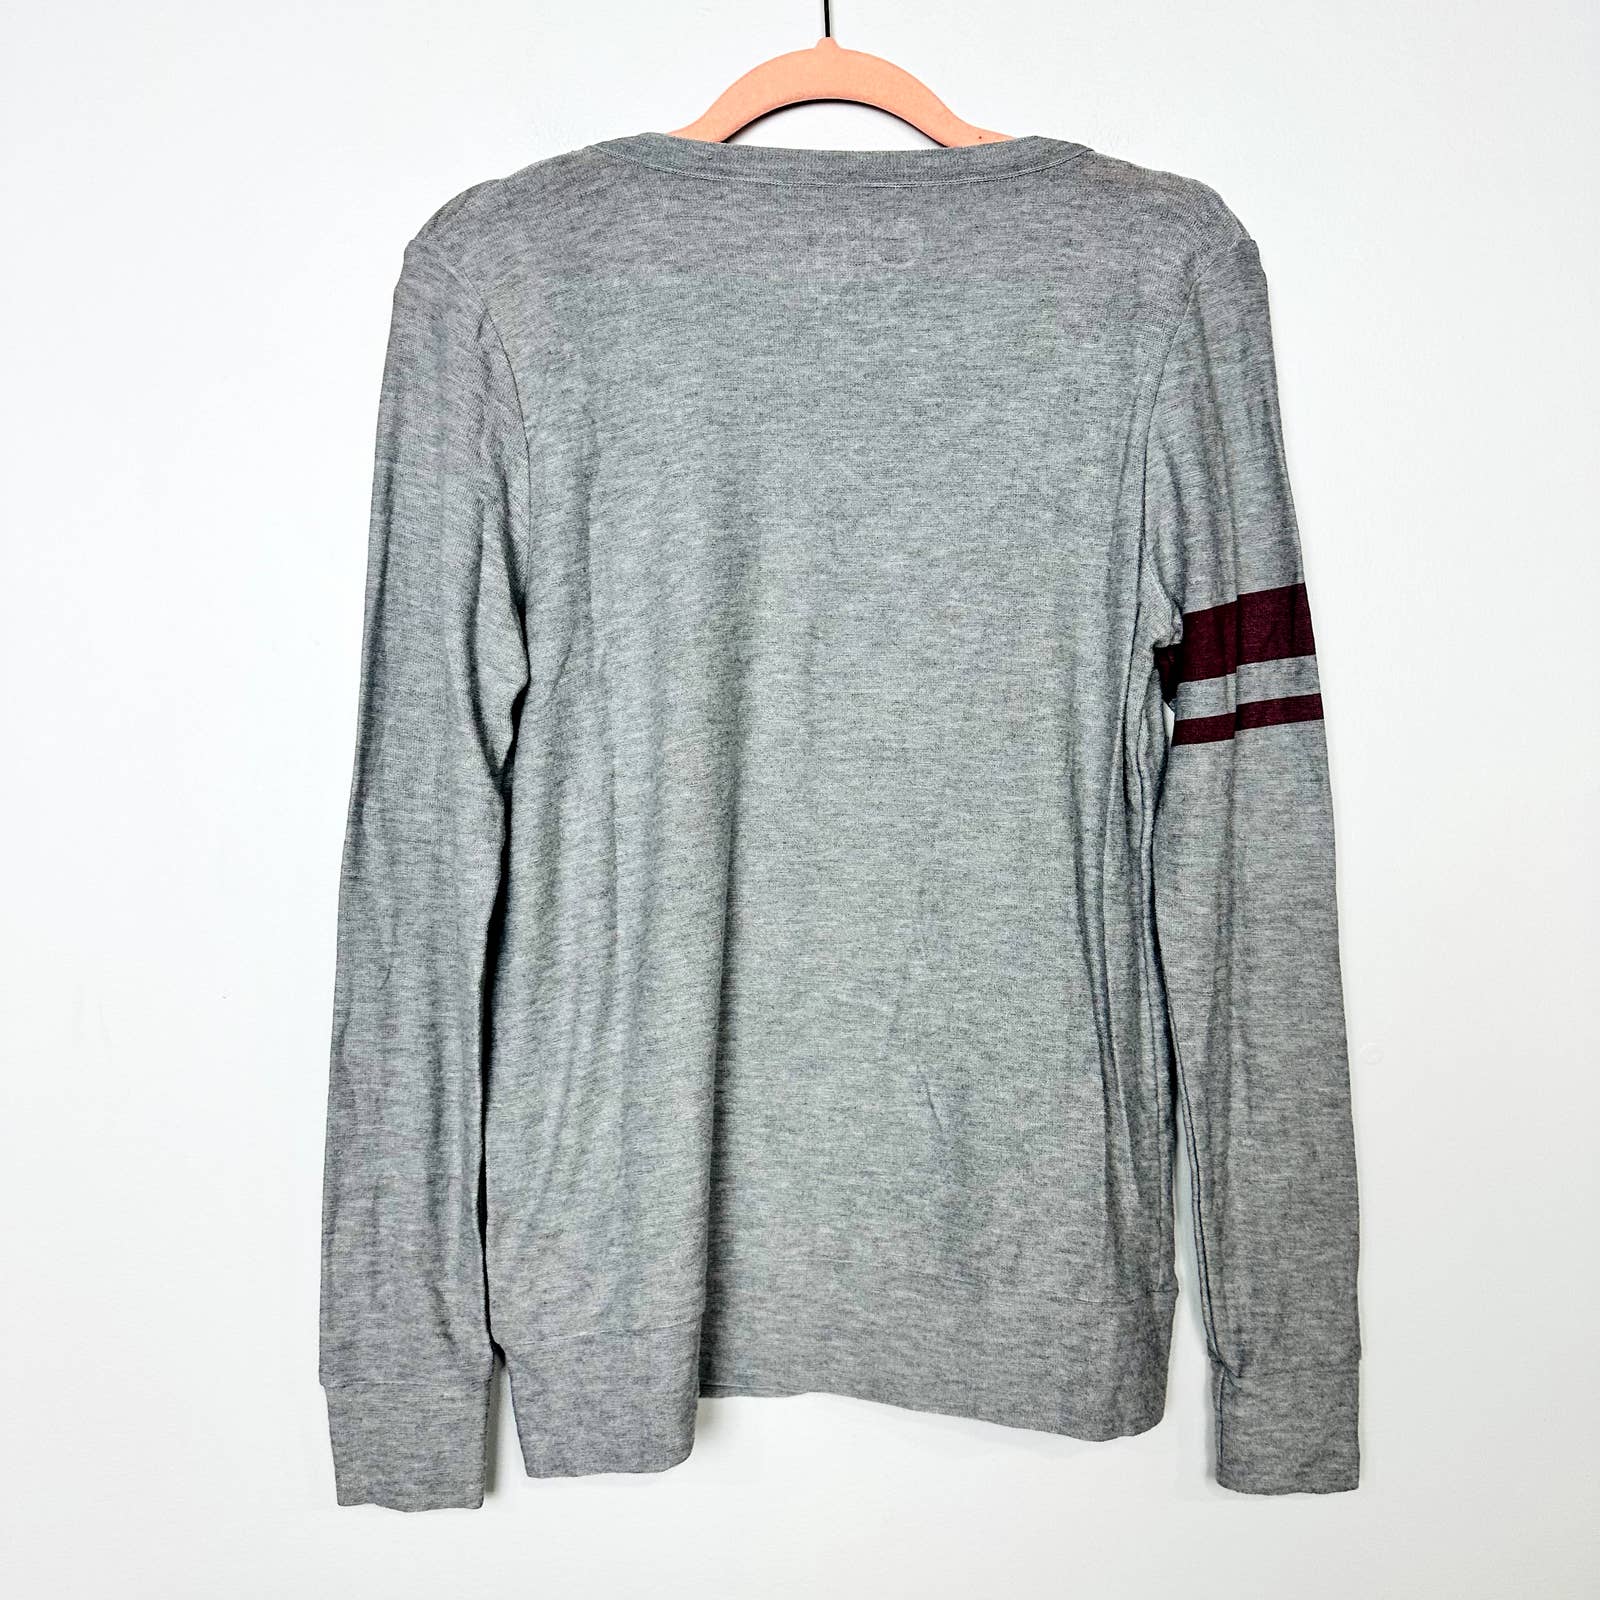 Chaser NWOT Physical Dept. Education Long Sleeve Pullover Top Gray Small